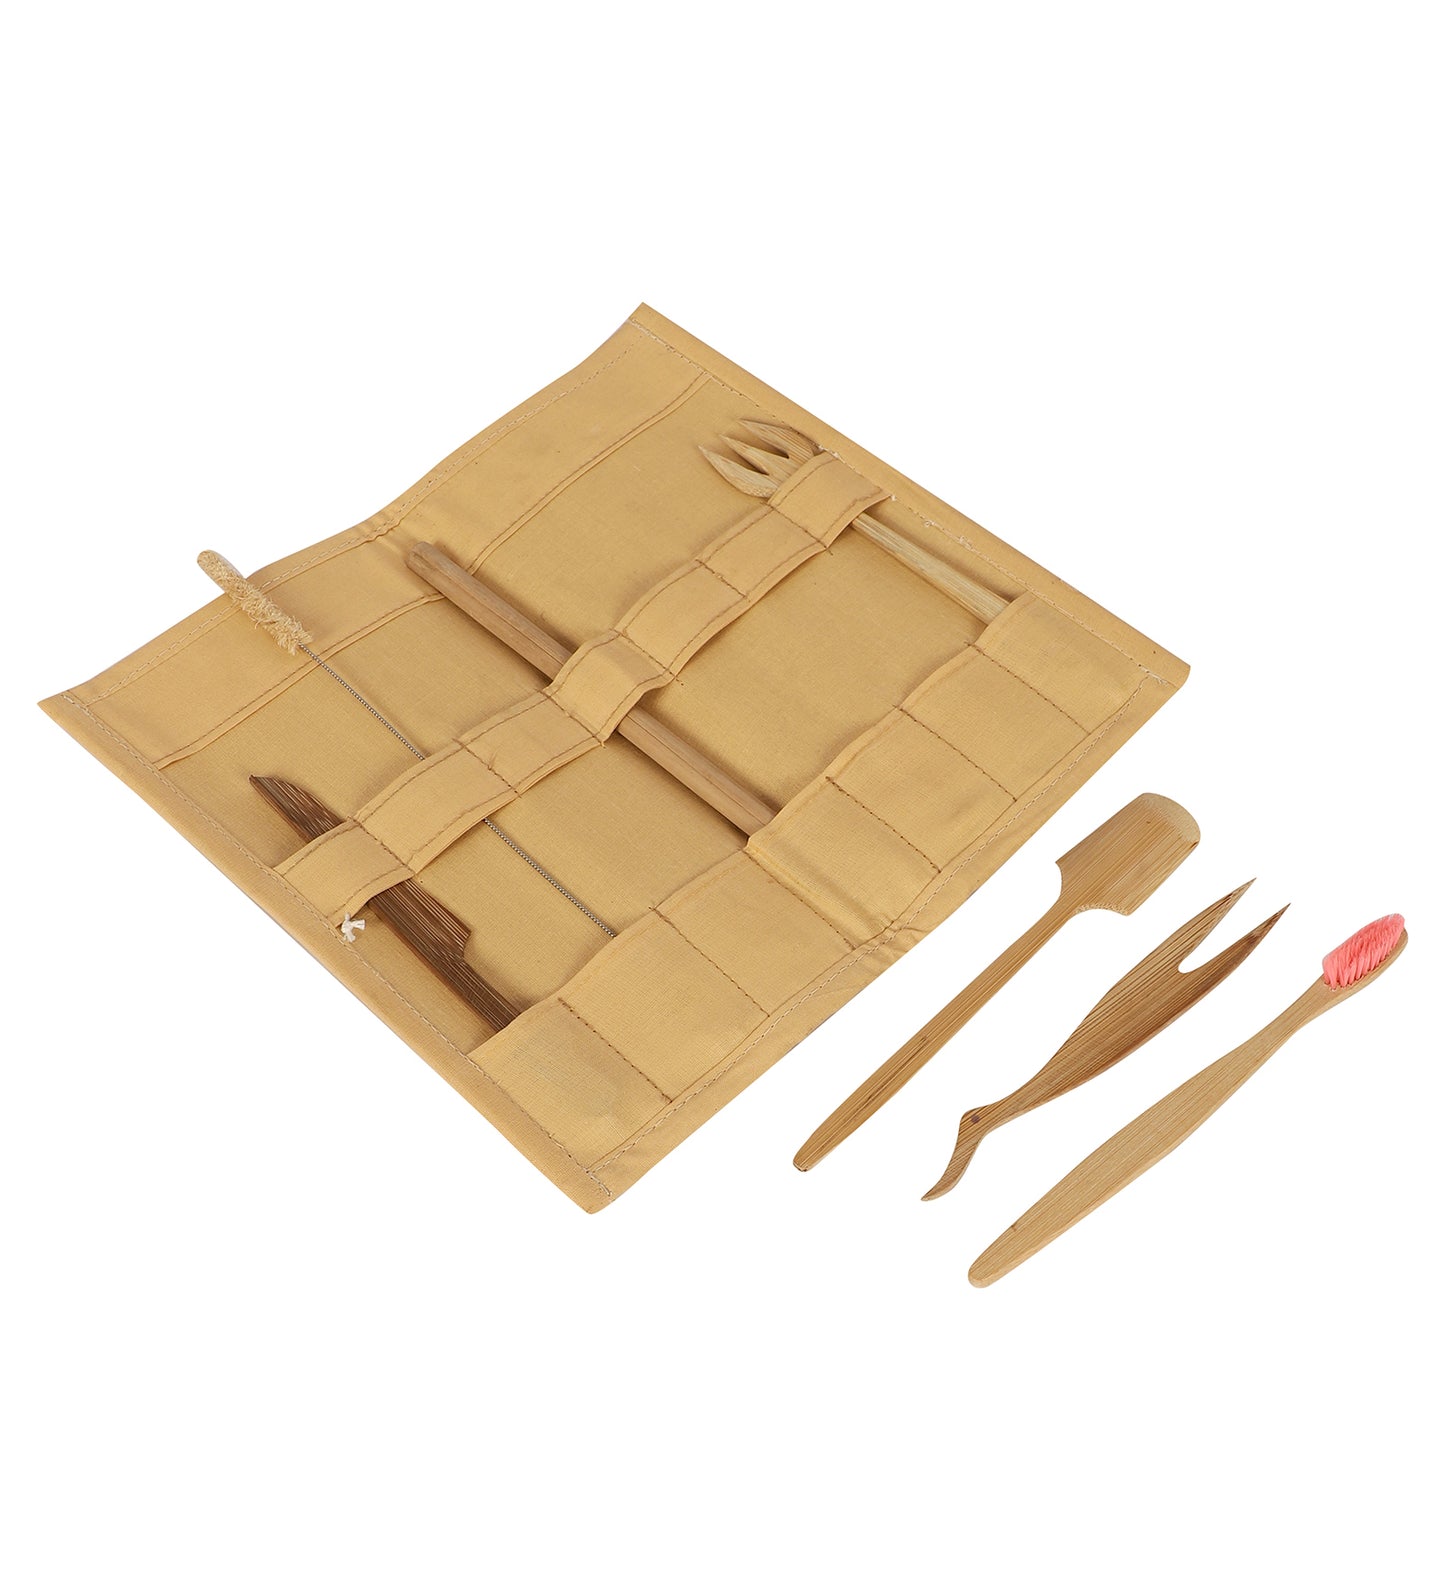 Bamboo Utility Set with Pouch. Includes Toothbrush, Straw, Cutlery and Cleaner